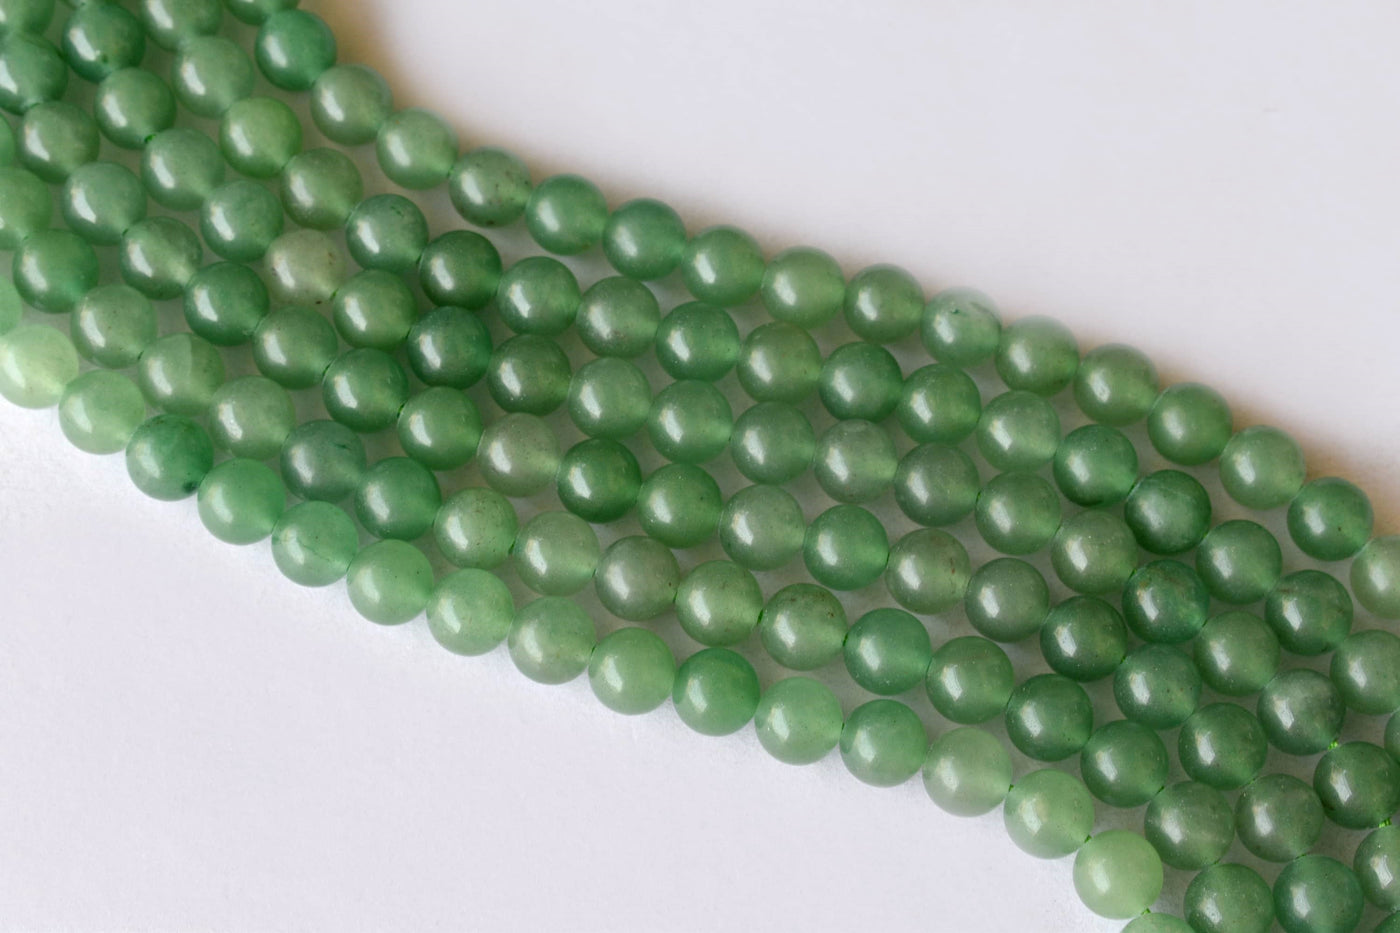 Green Aventurine Beads, Natural Round Crystal Beads 4mm to 12mm